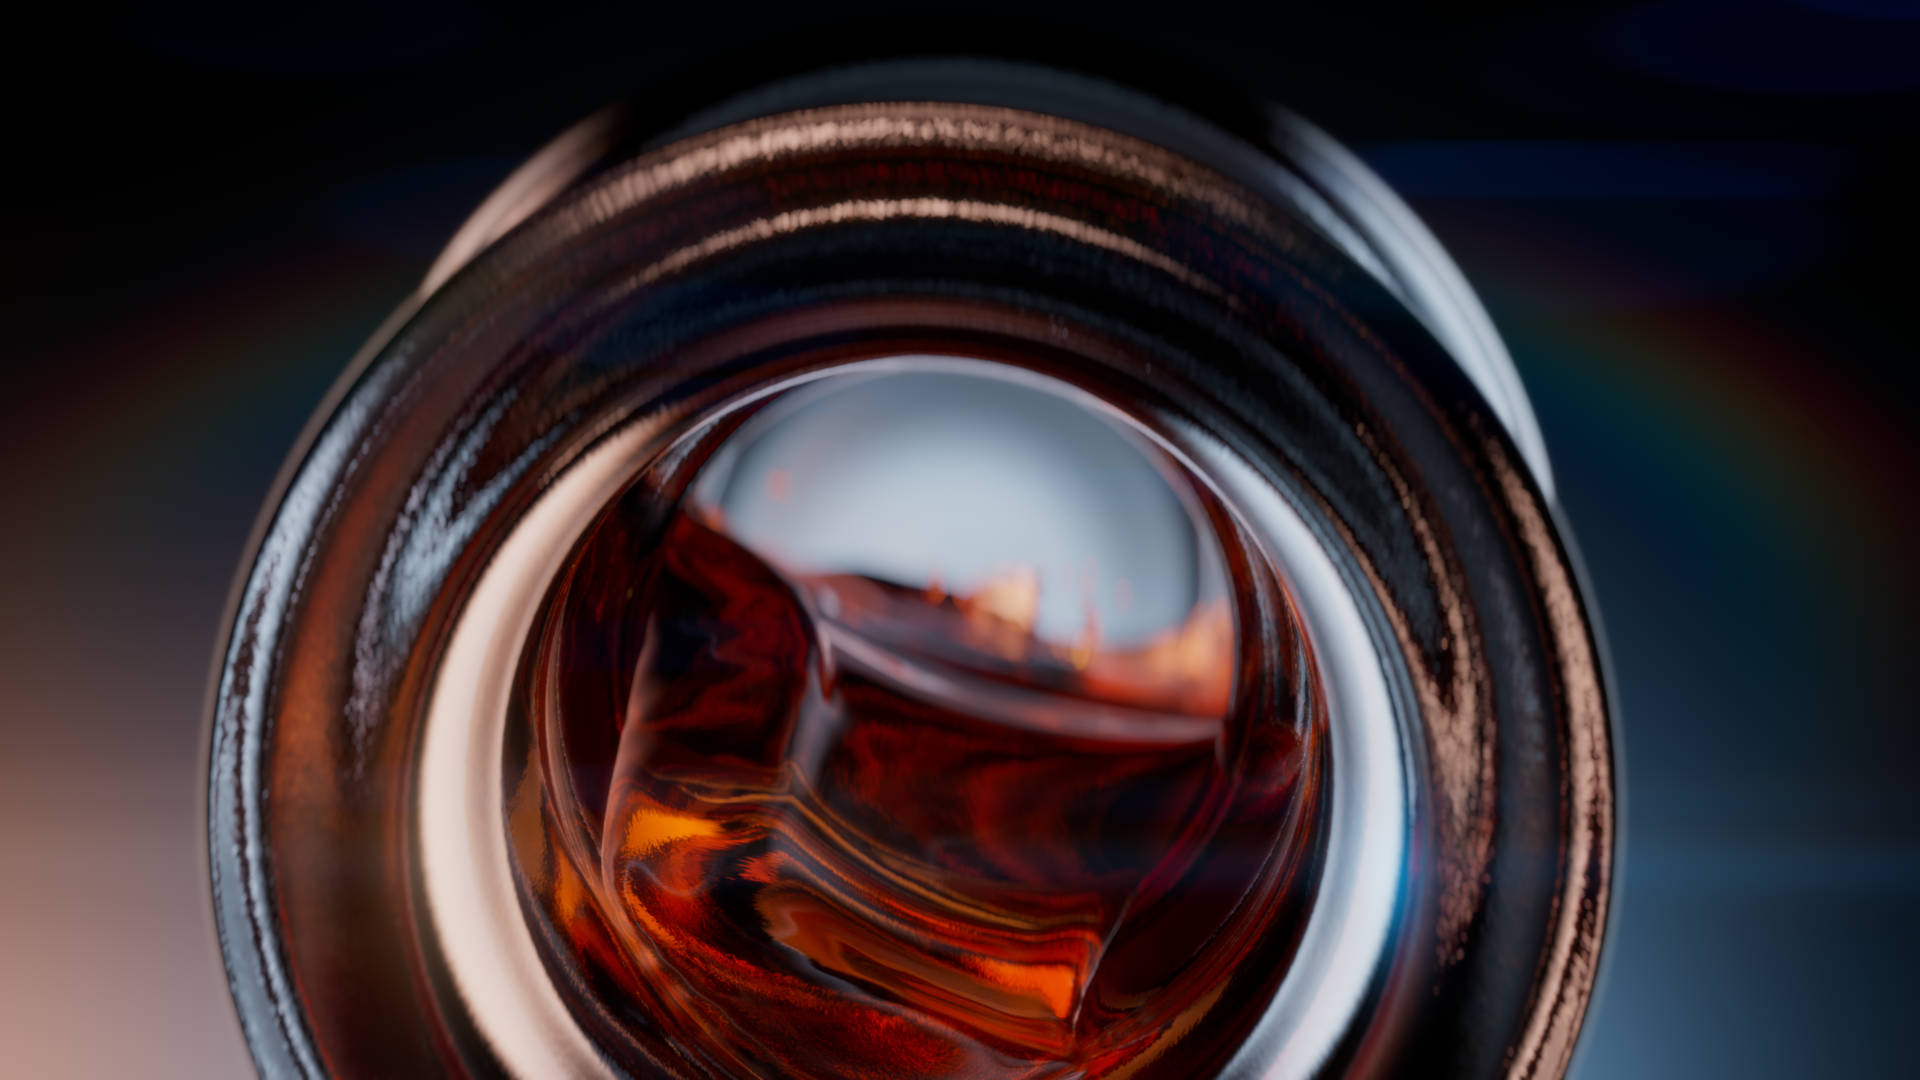 Close-up view of whisky pouing out of bottle in slow motion.